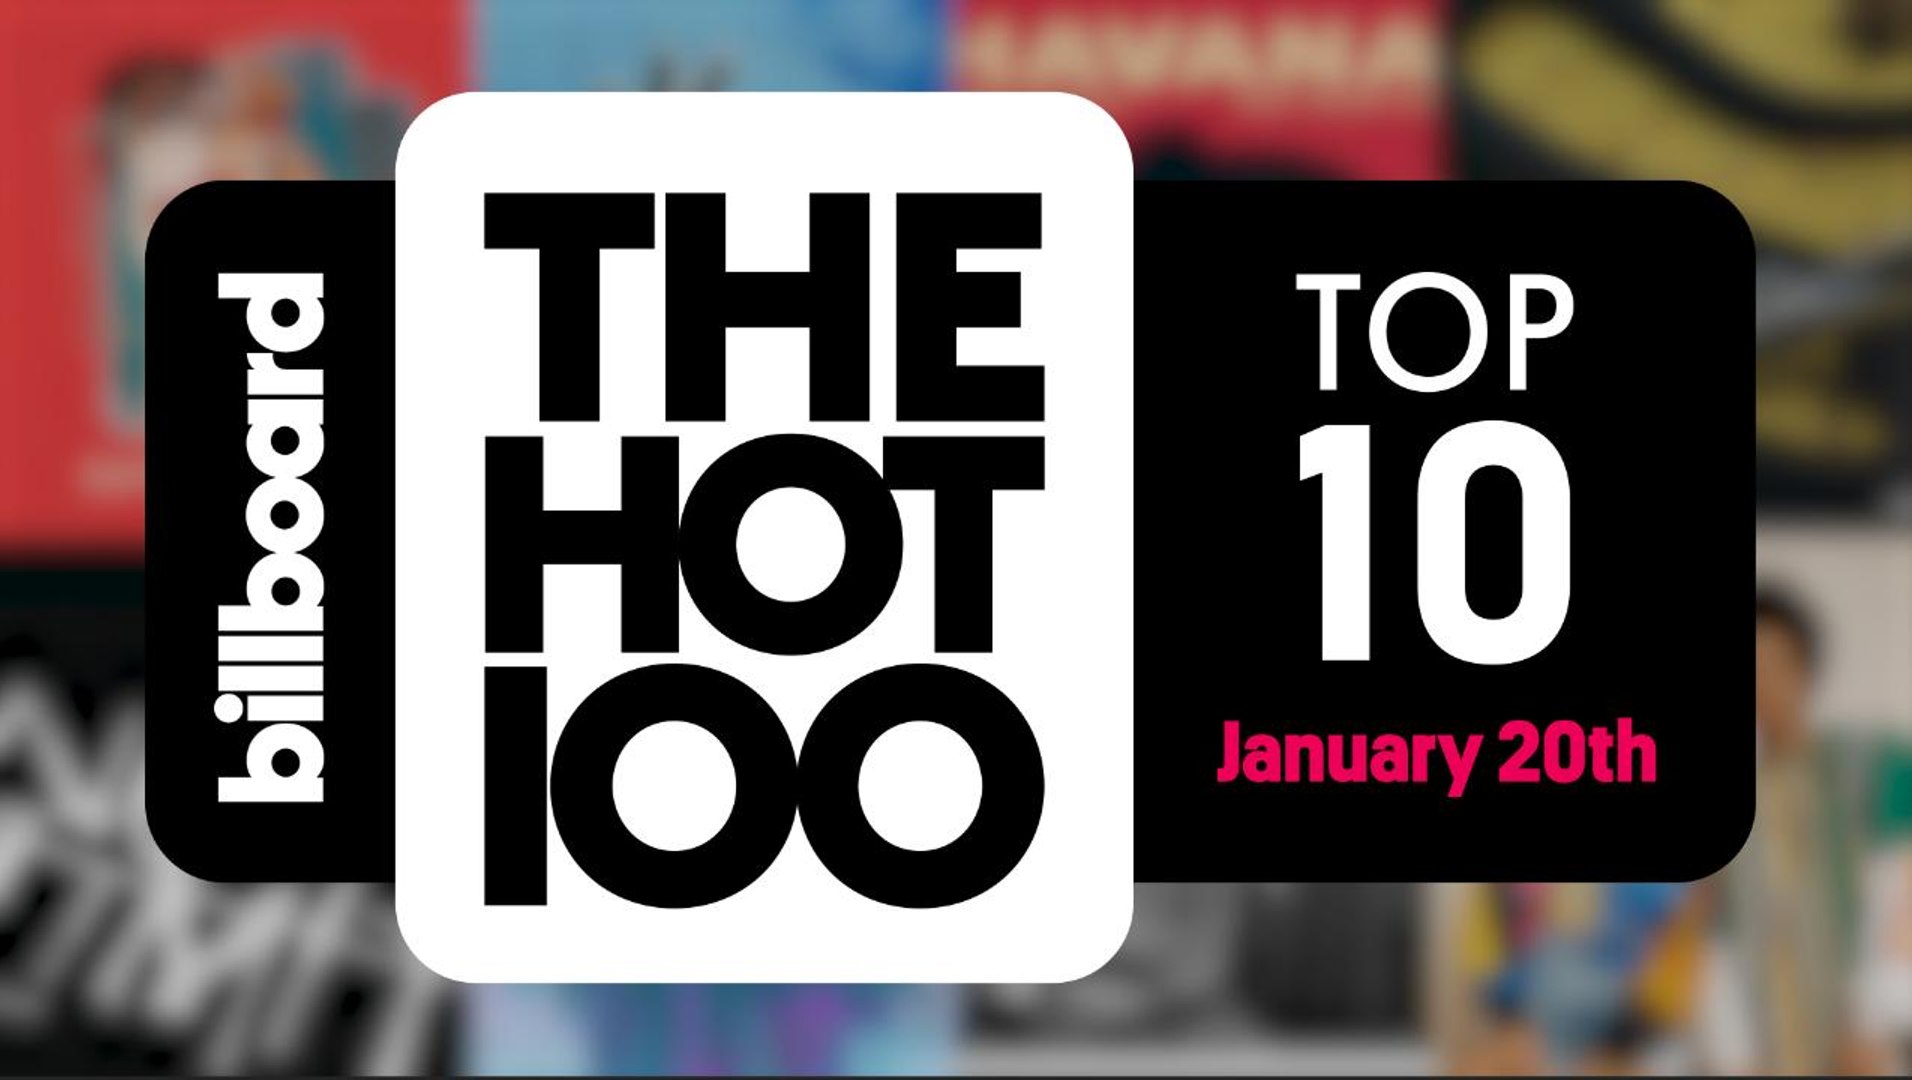 Early Release! Billboard Hot 100 Top 10 January 20th 2018 Countdown | Official